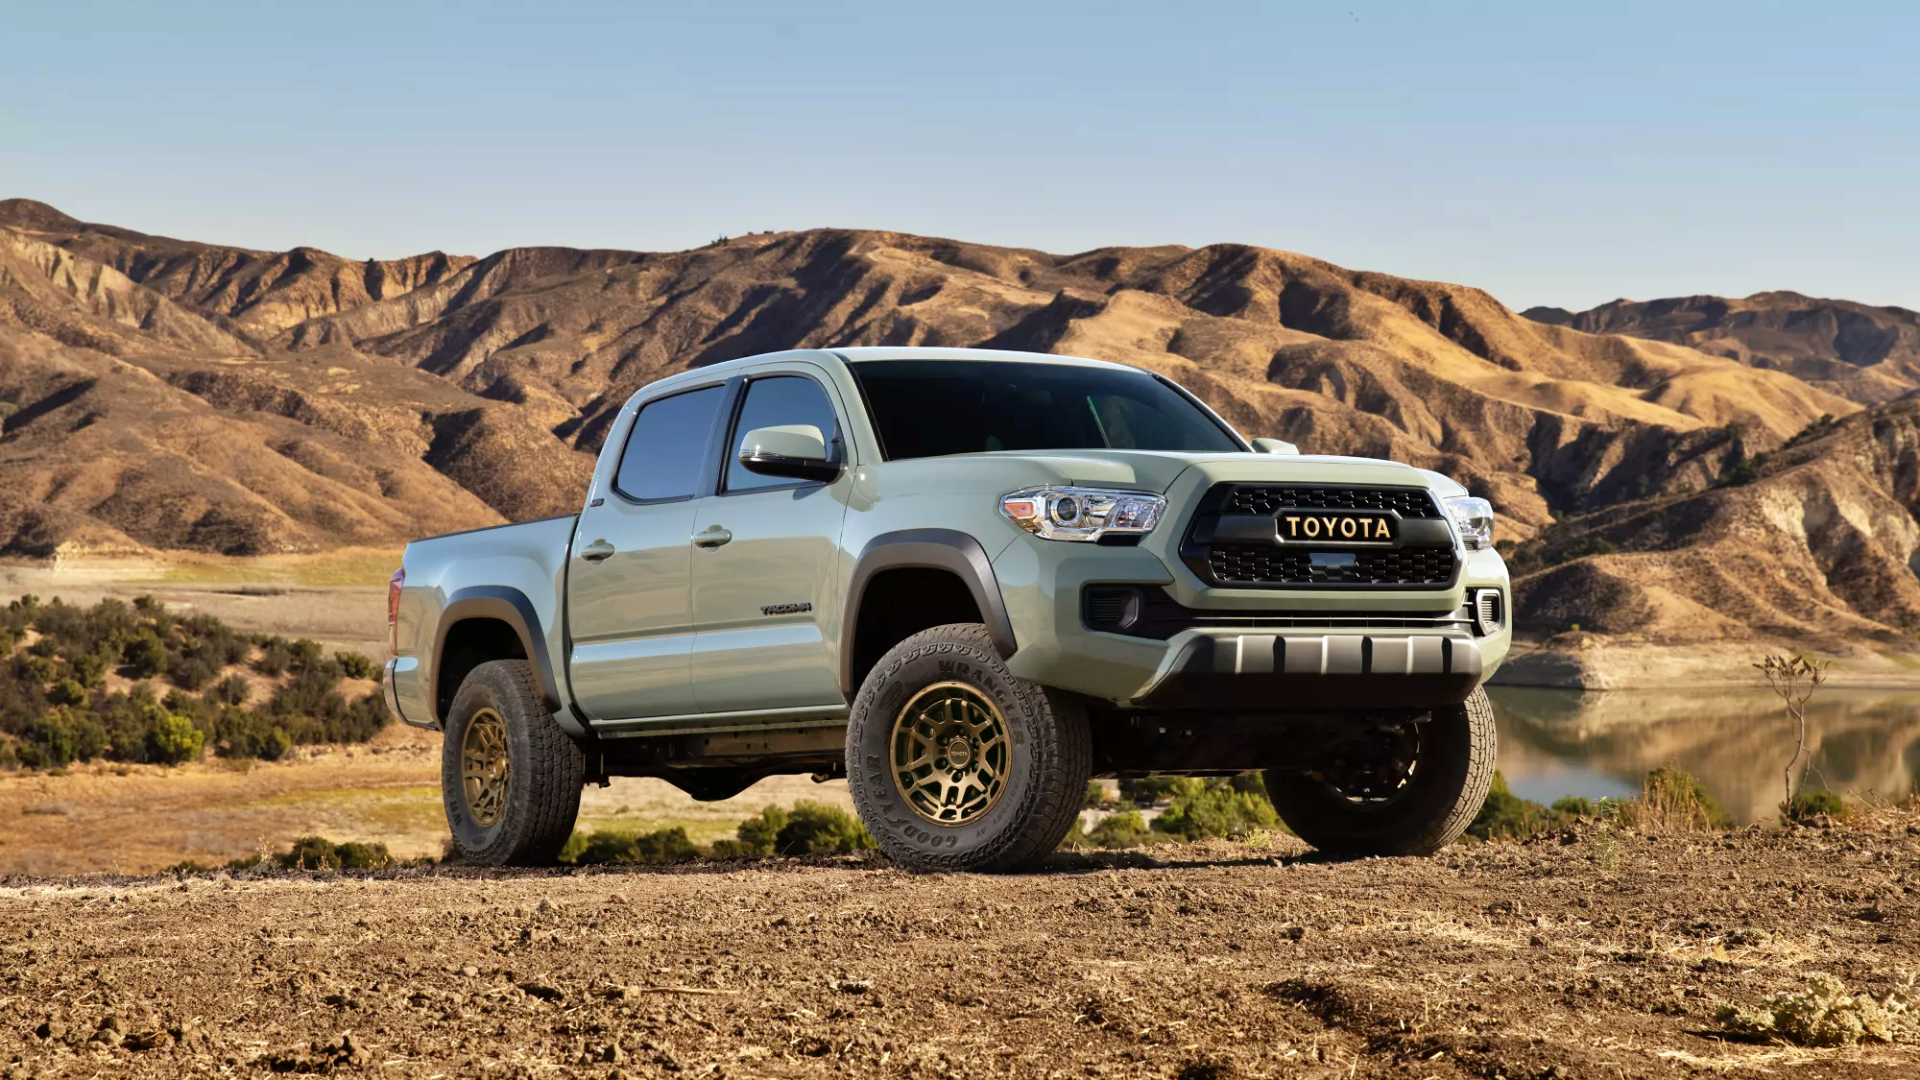 Why Millennials Can't Wait For the Toyota Tacoma Electric Pickup Truck